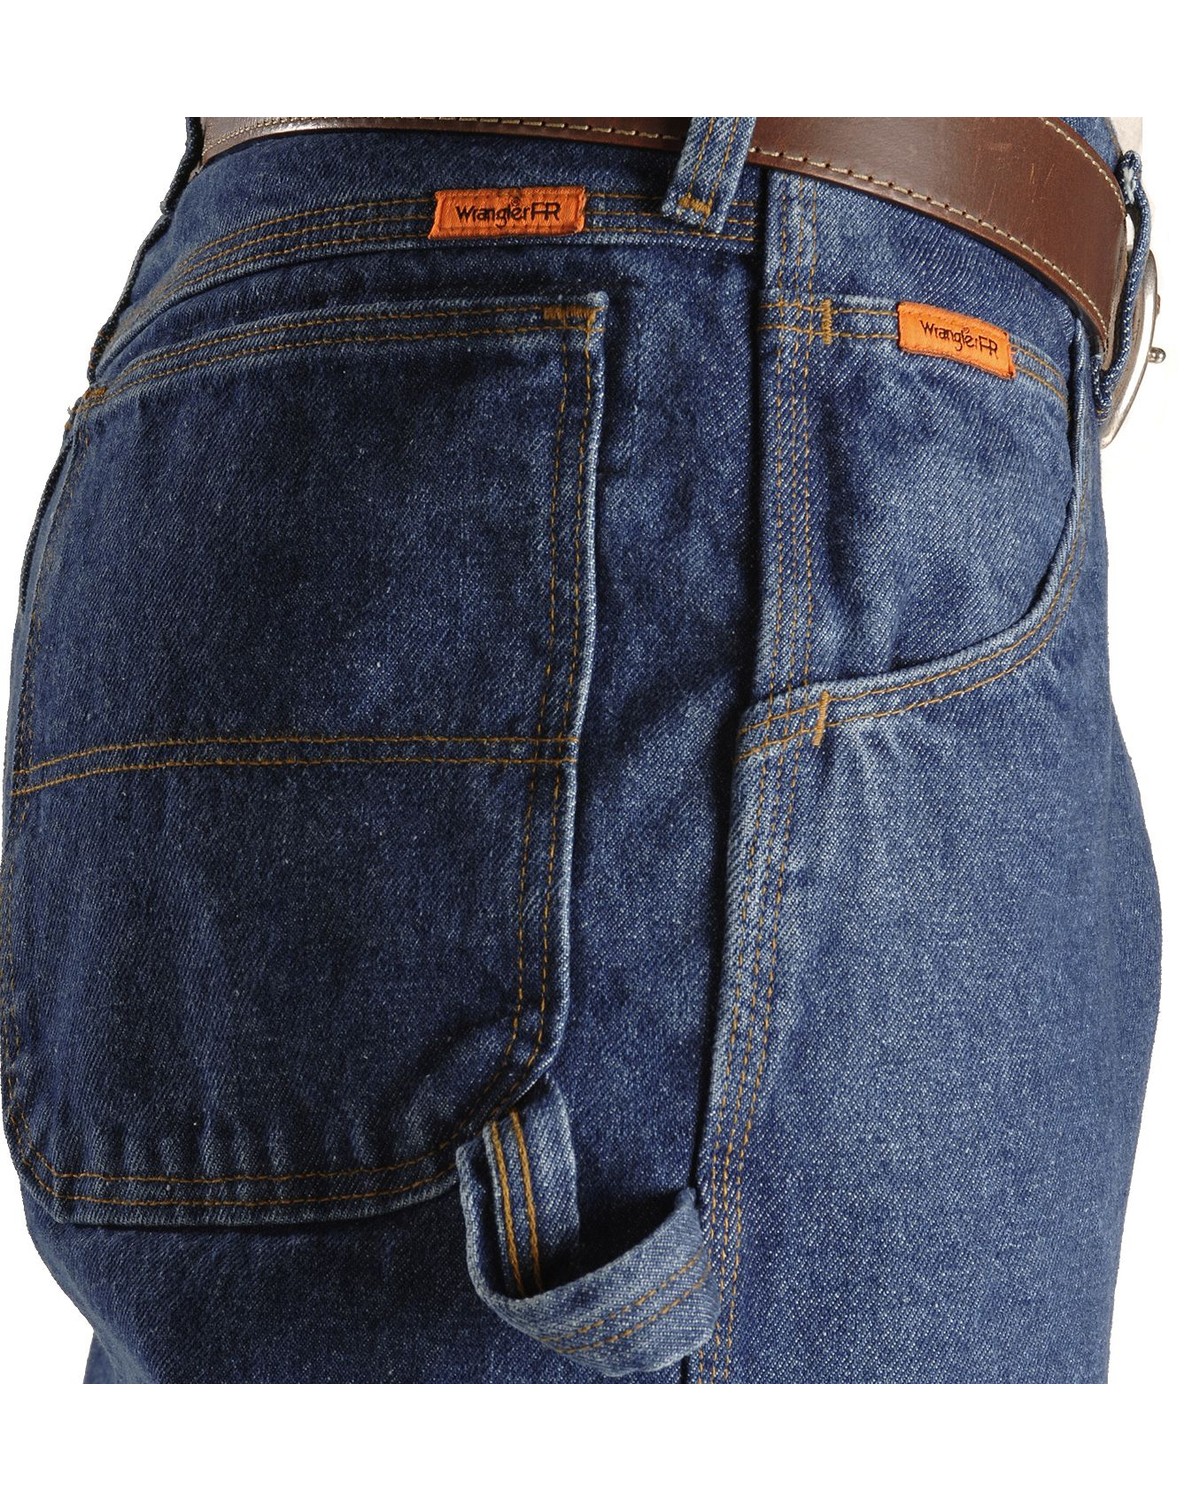 Wrangler Riggs Men's FR Carpenter Relaxed Fit Work Jeans - Country ...